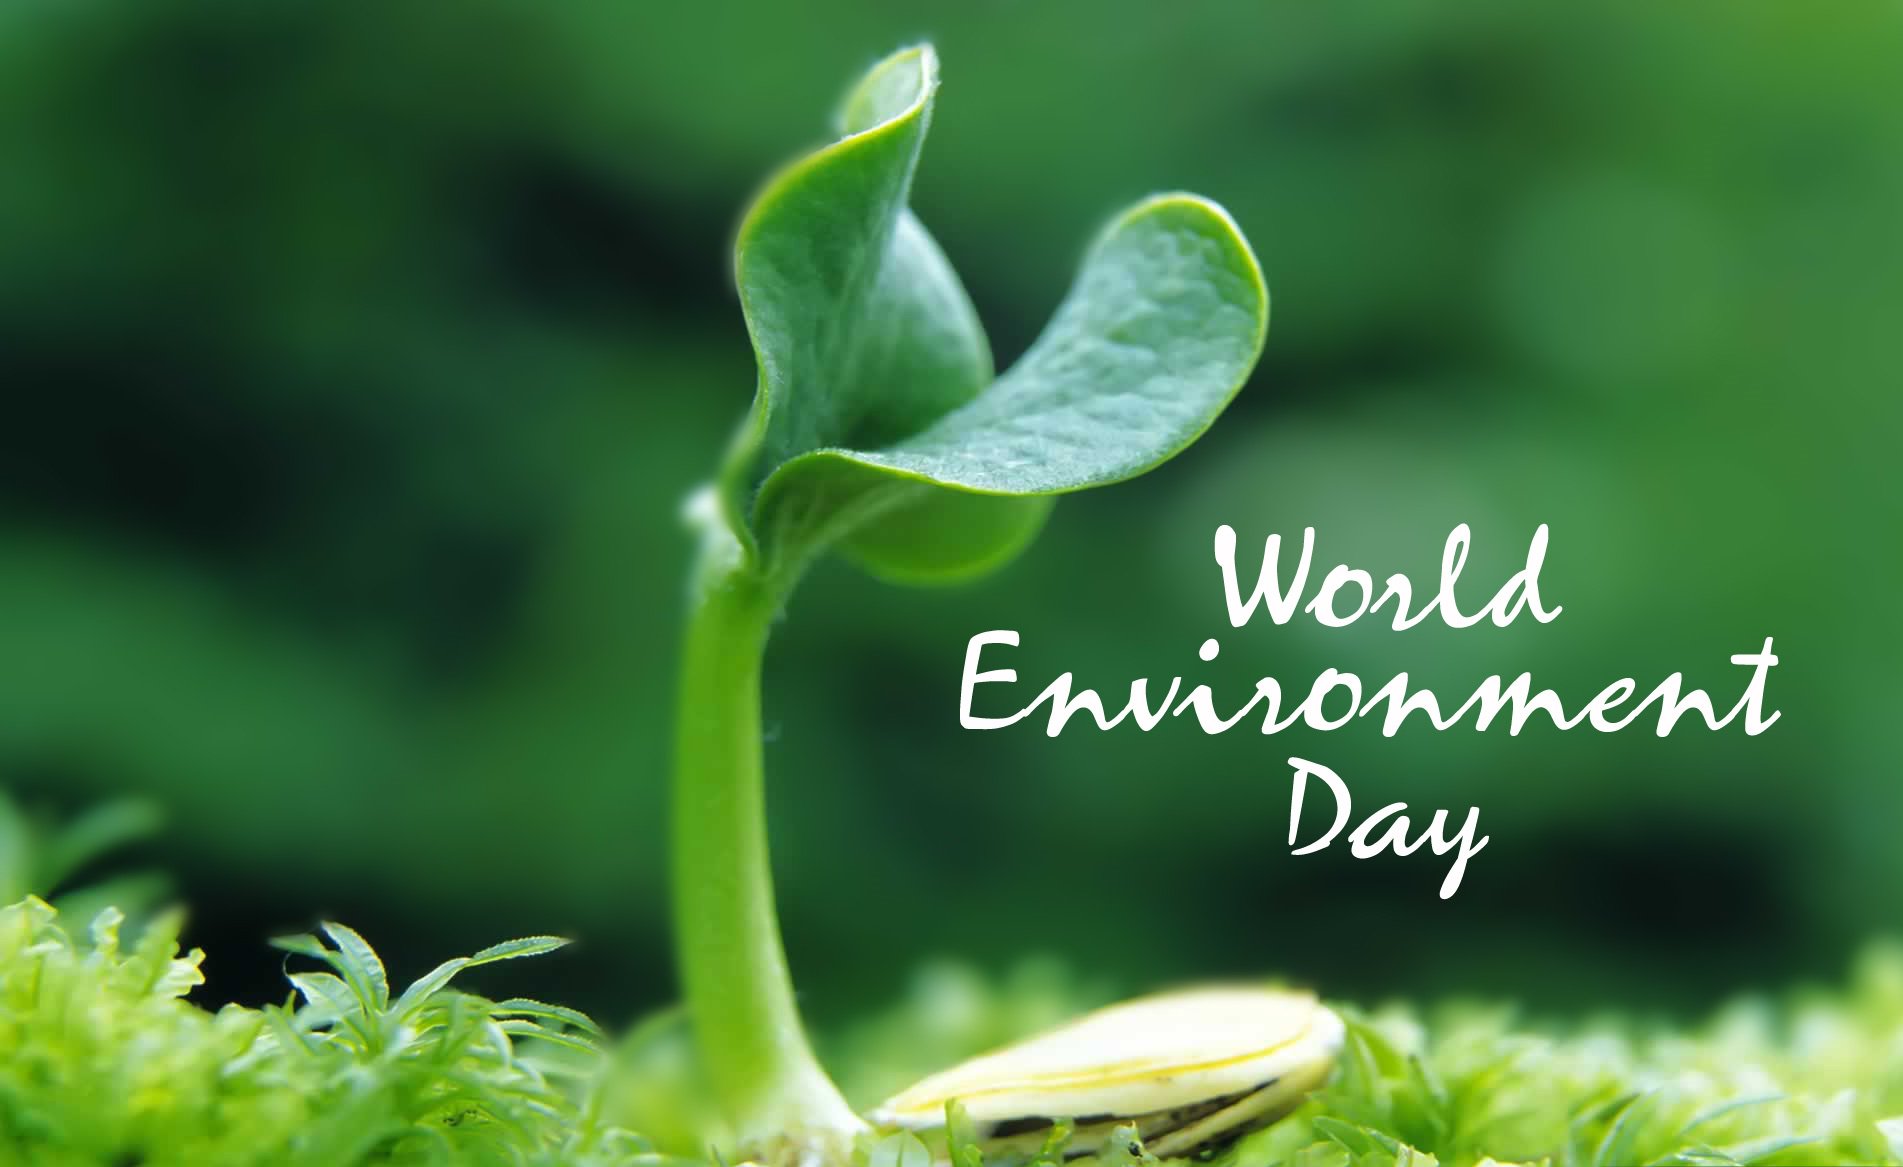 World Environment Day Images